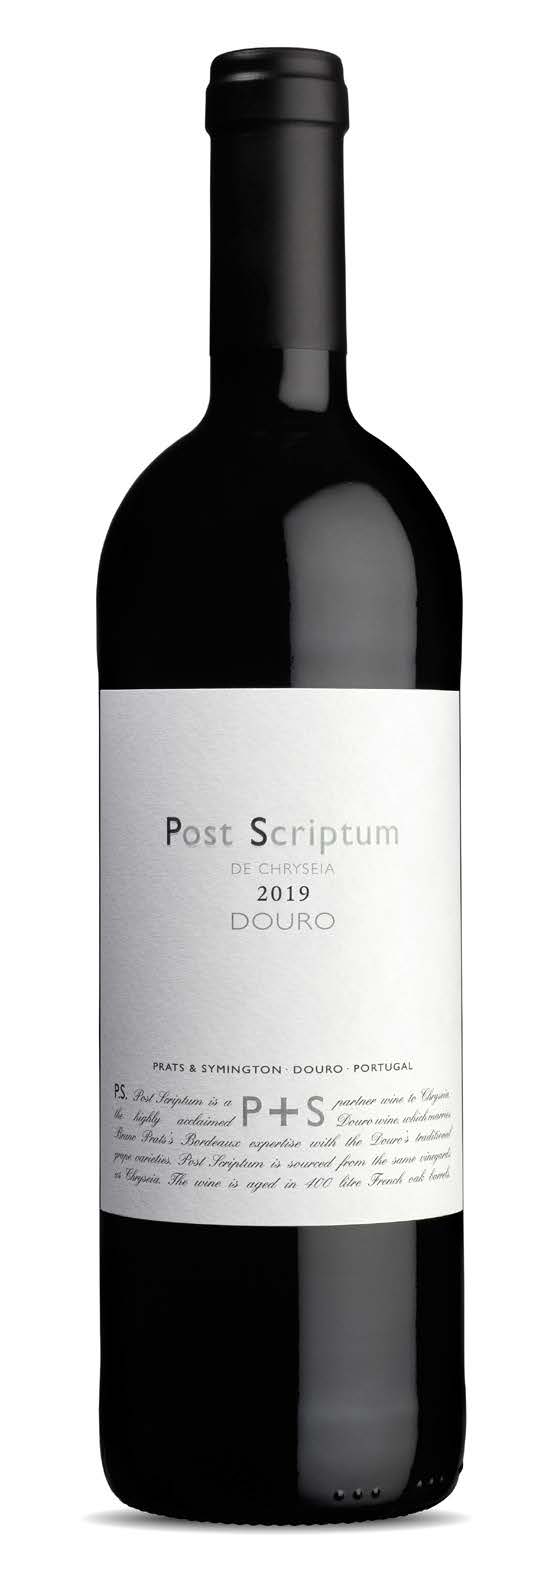 Product Image for P&S POST SCRIPTUM DE CHRYSEIA DOURO RED 2019